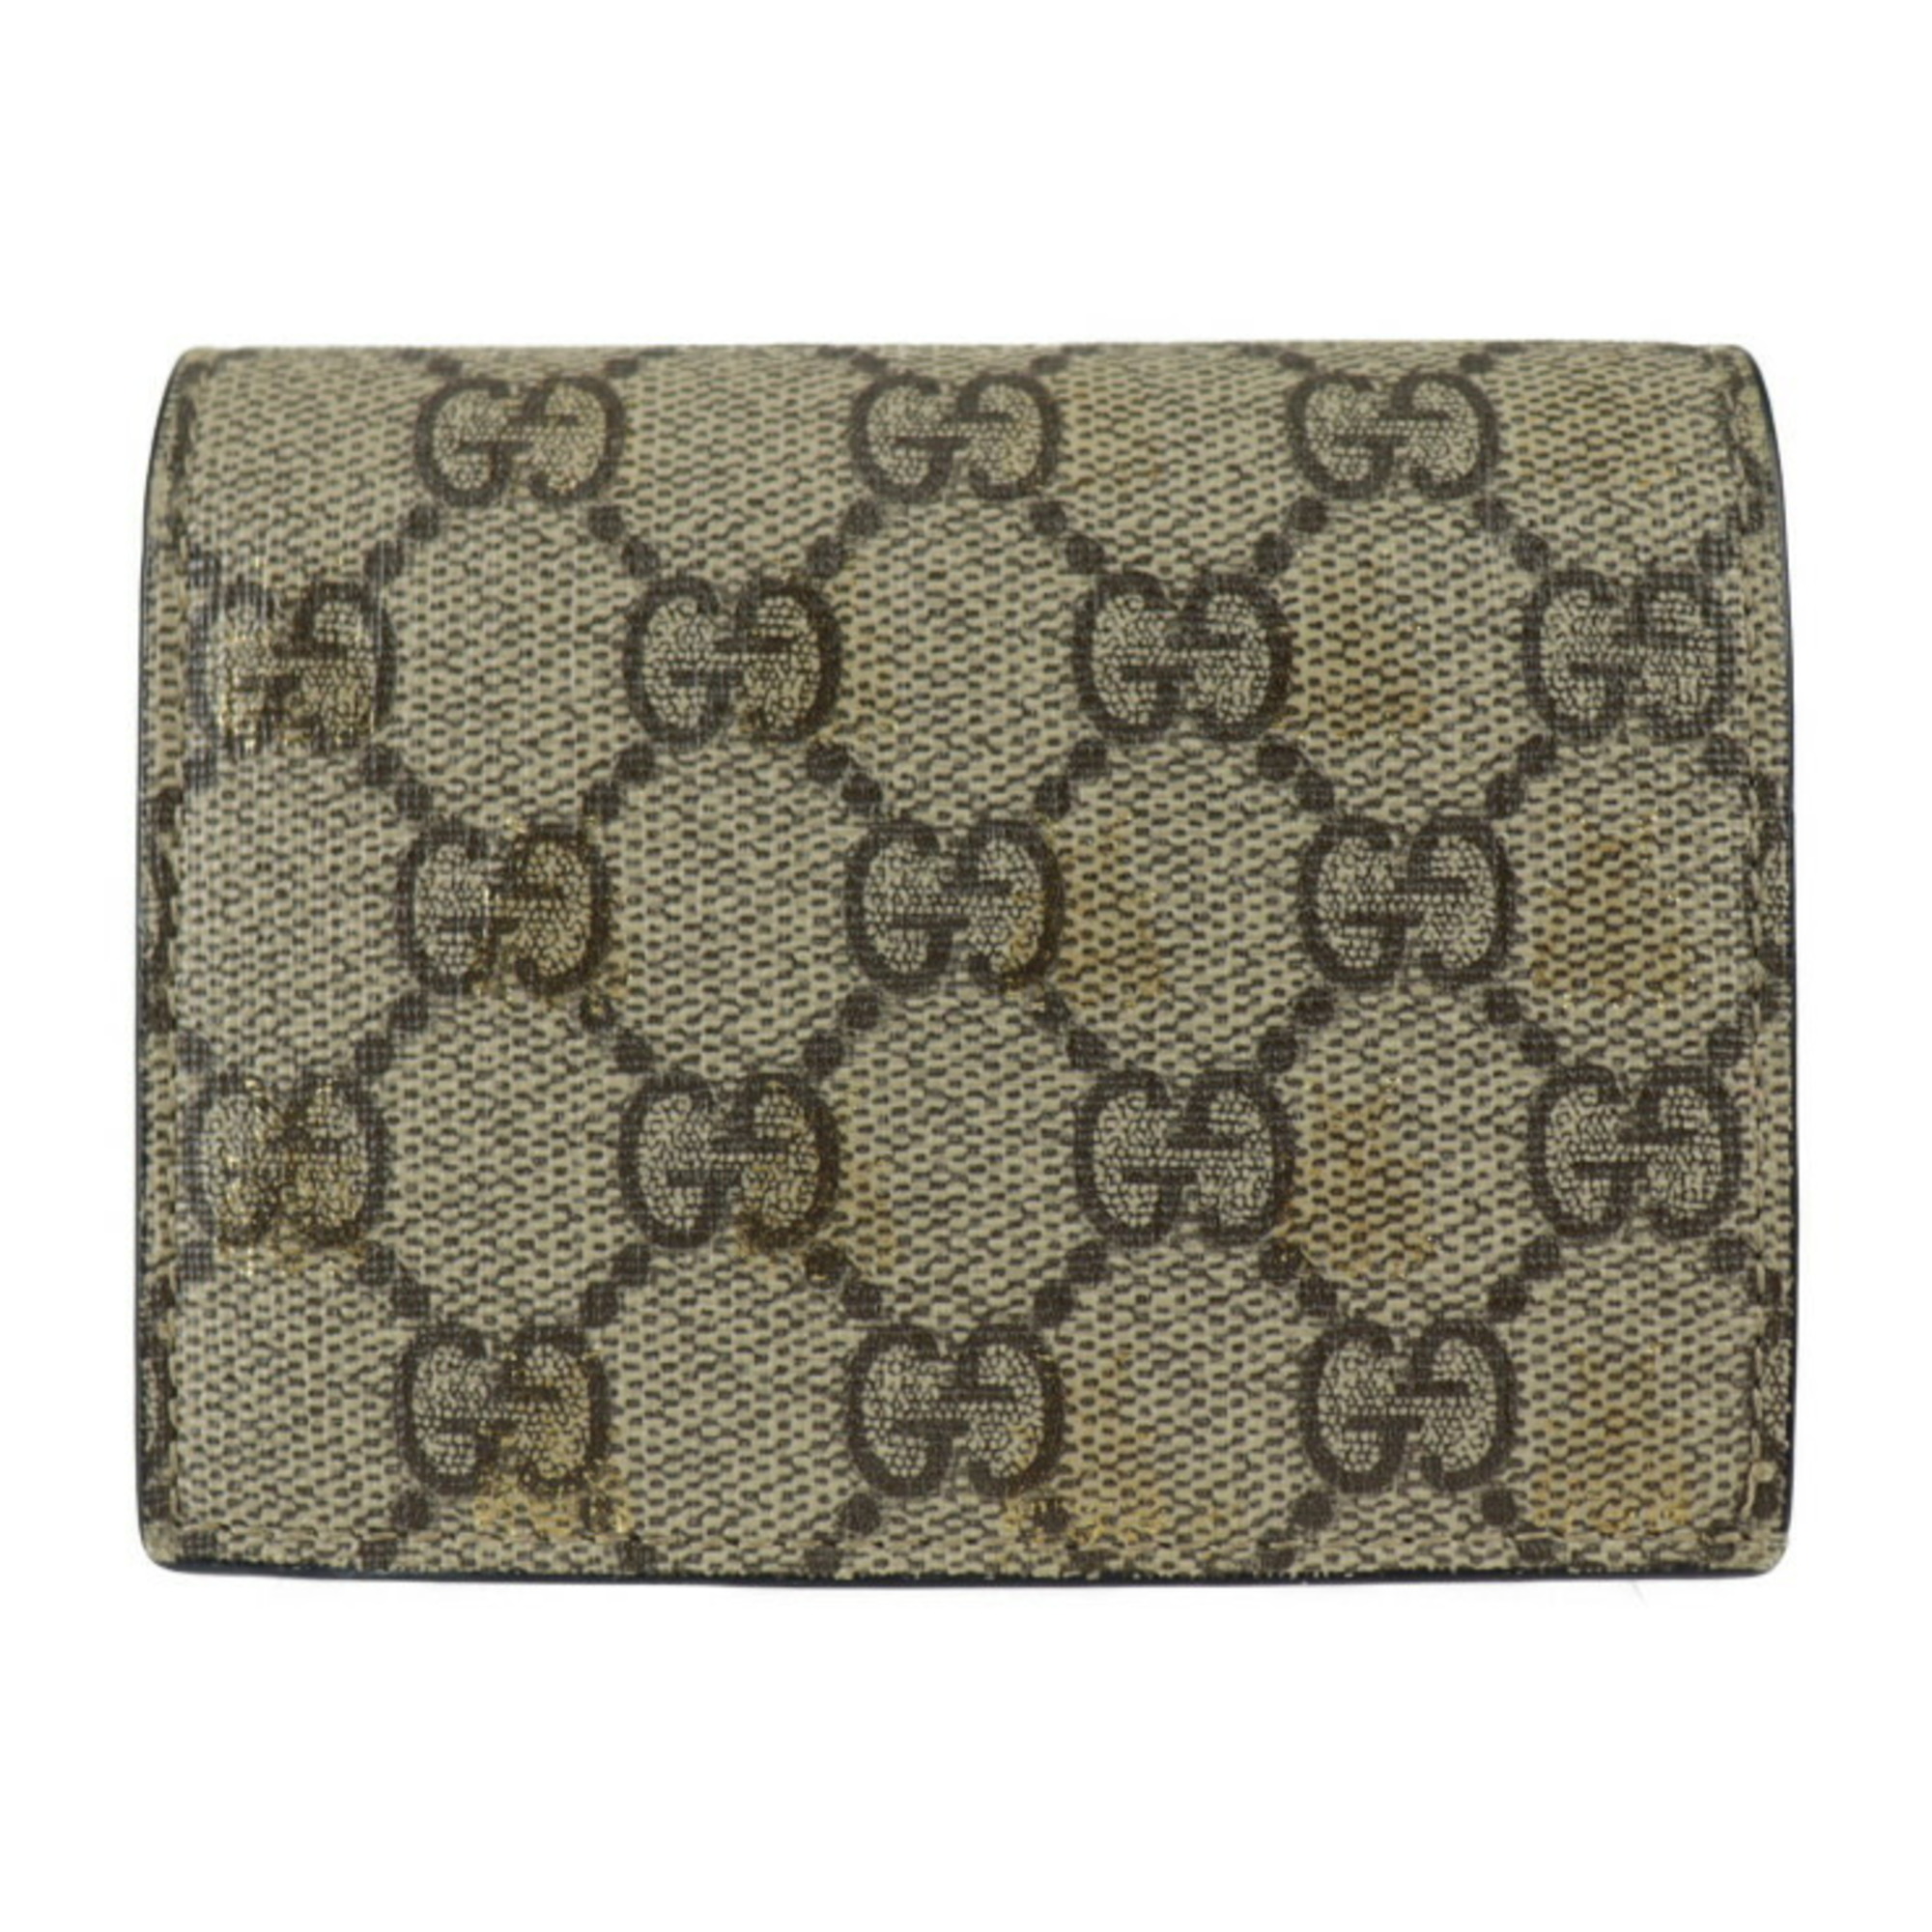 GUCCI Gucci Compact Wallet Bifold 508757 GG Supreme Canvas Leather Beige Brown Gold Black BEE Bee